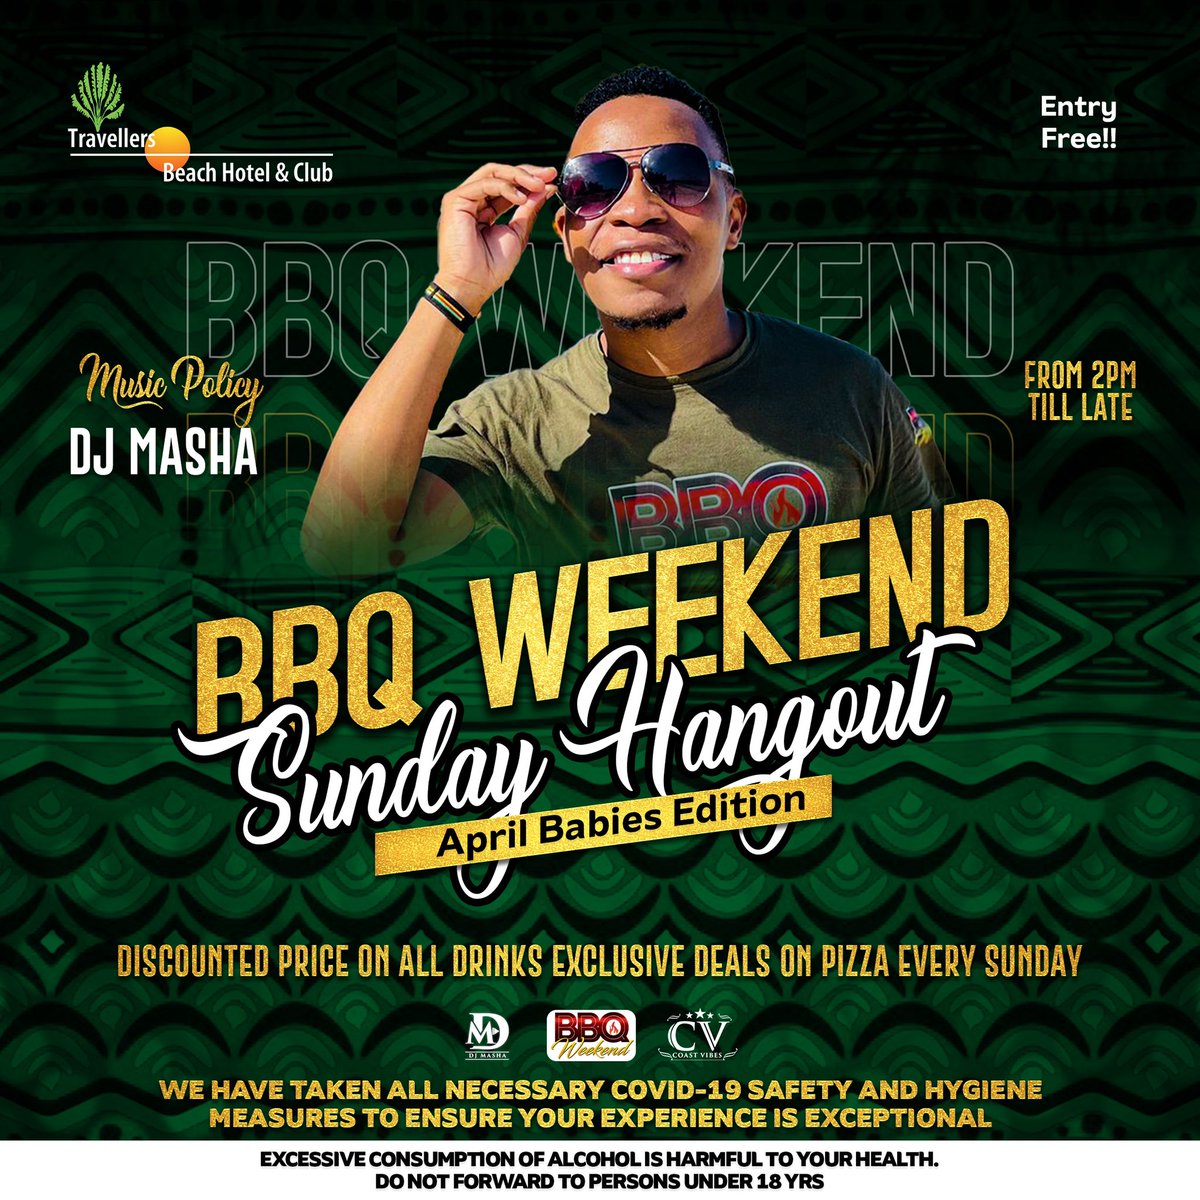 It’s April Babies Edition. 🥳 🎂 Let’s catch some Sun. Good Vibes. Barbecue and Inshallah. ❤️ Your ultimate Sunday plan @travellersbhc with @djmashakenya . Come through! ☀️ ⛱ #BarbecueWeekend #Events254 #254fashion #254publicity #IgersKenya #MagicalKenya #TembeaKenya